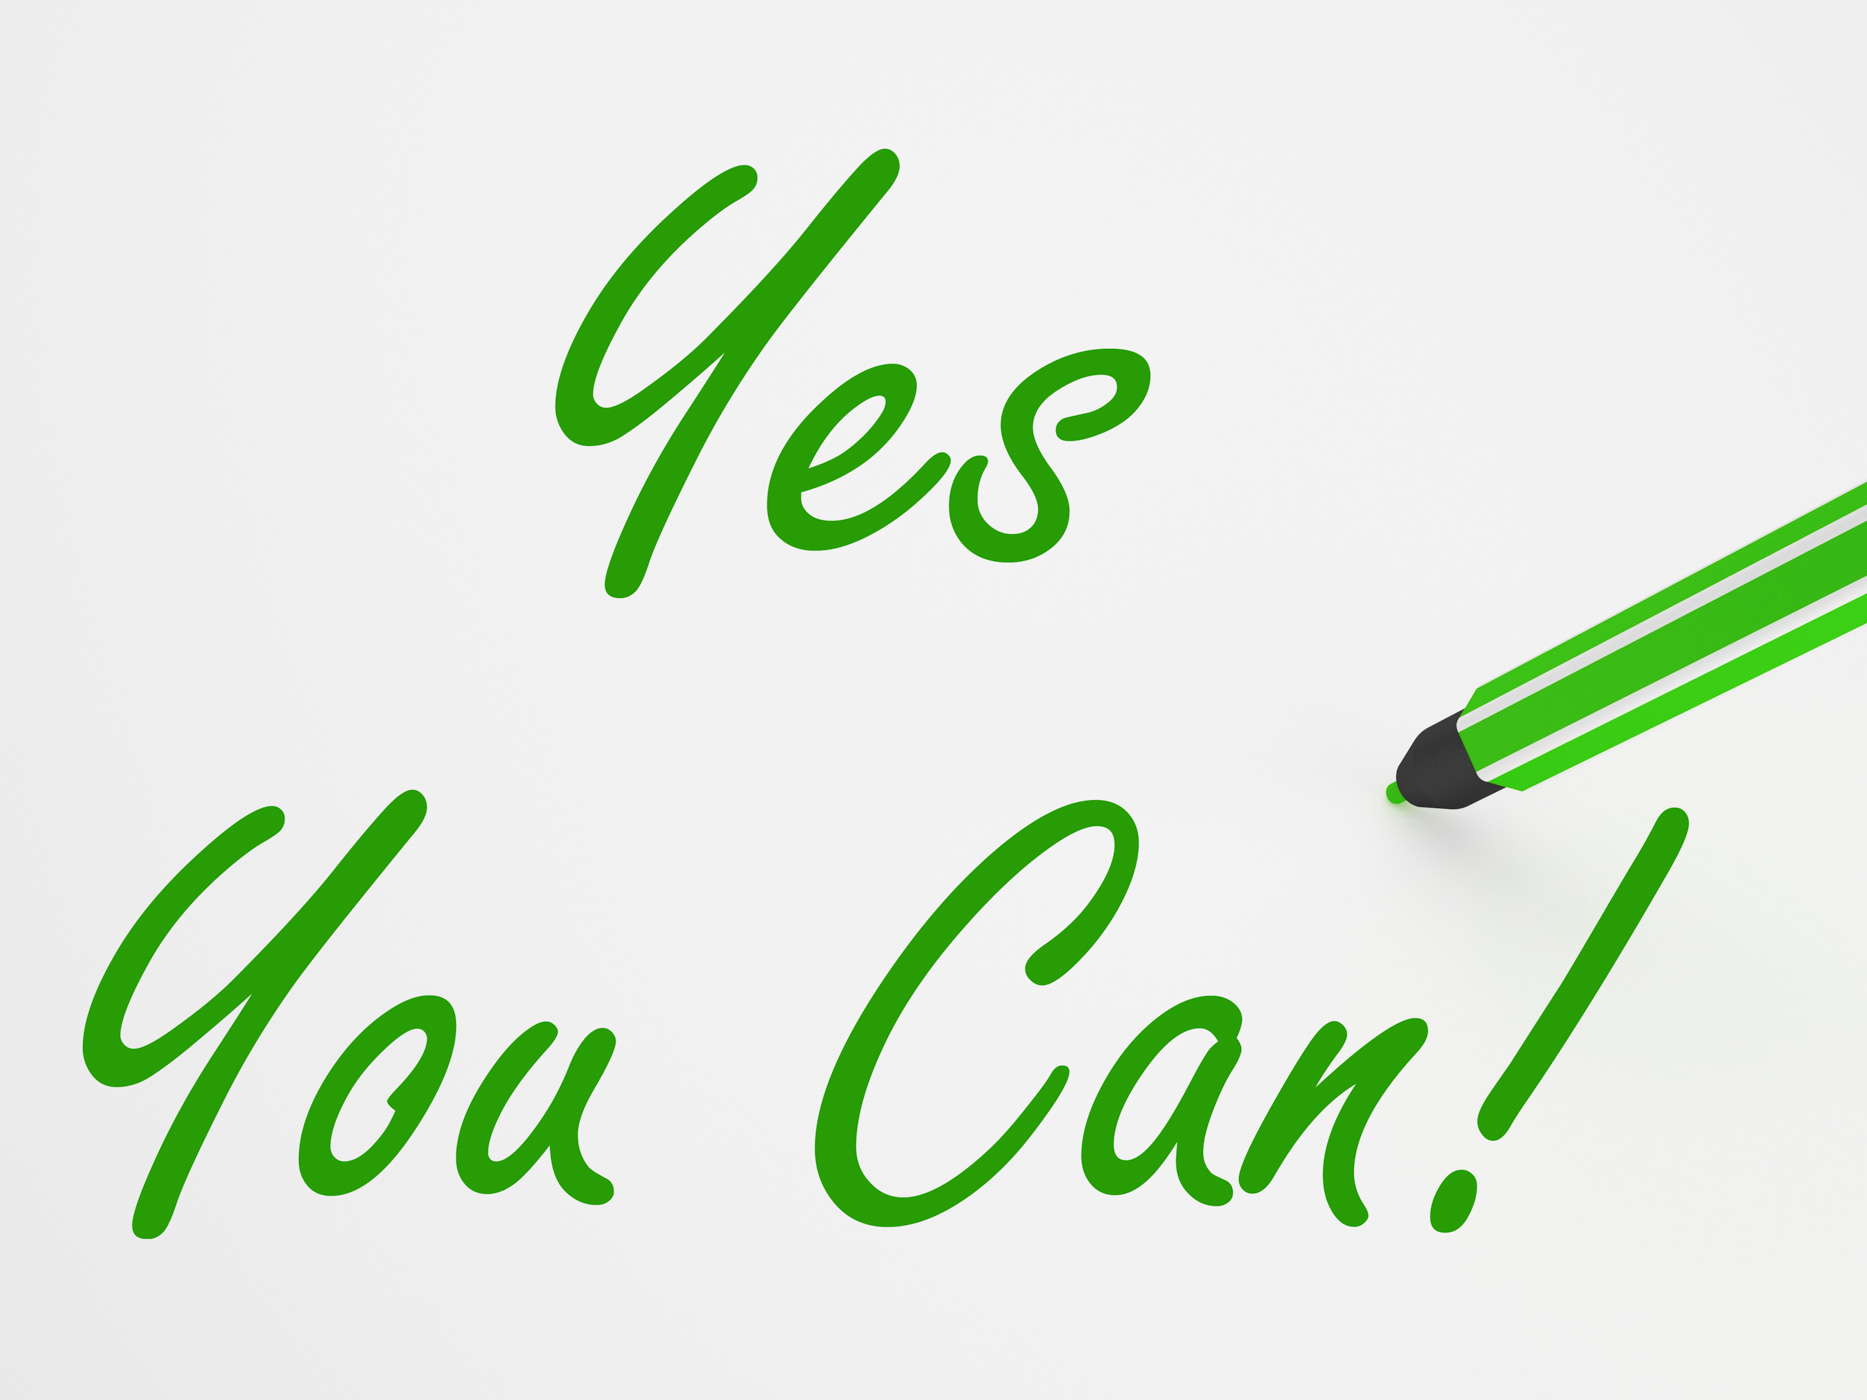 Yes you can! on whiteboard means encouragement and optimism photo